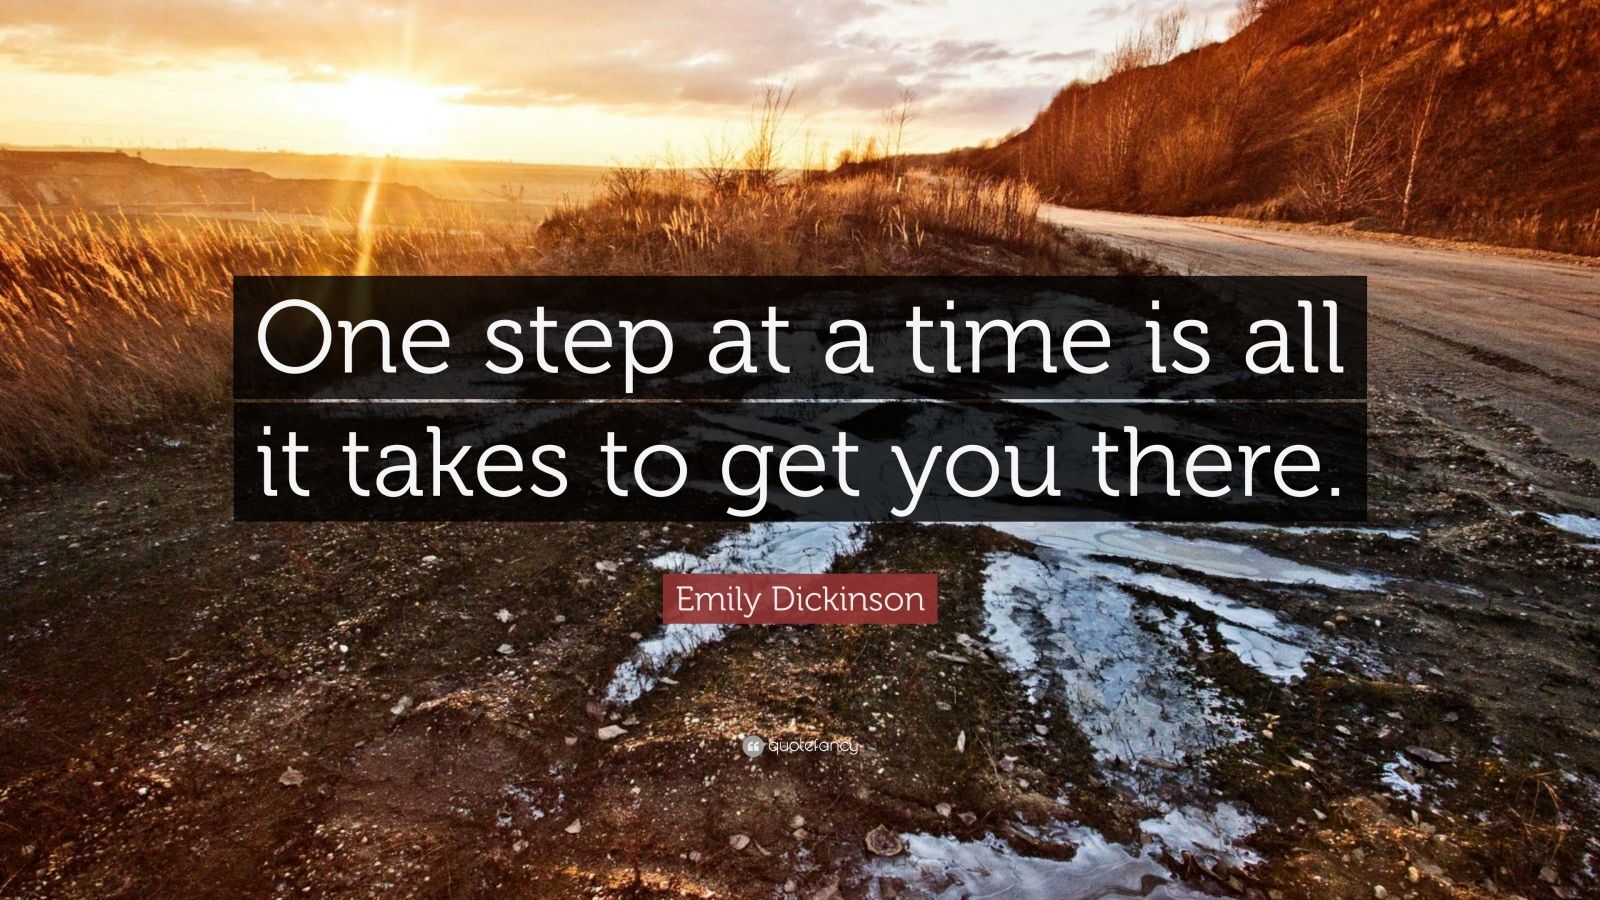 Emily Dickinson Quote “One step at a time is all it takes to get you